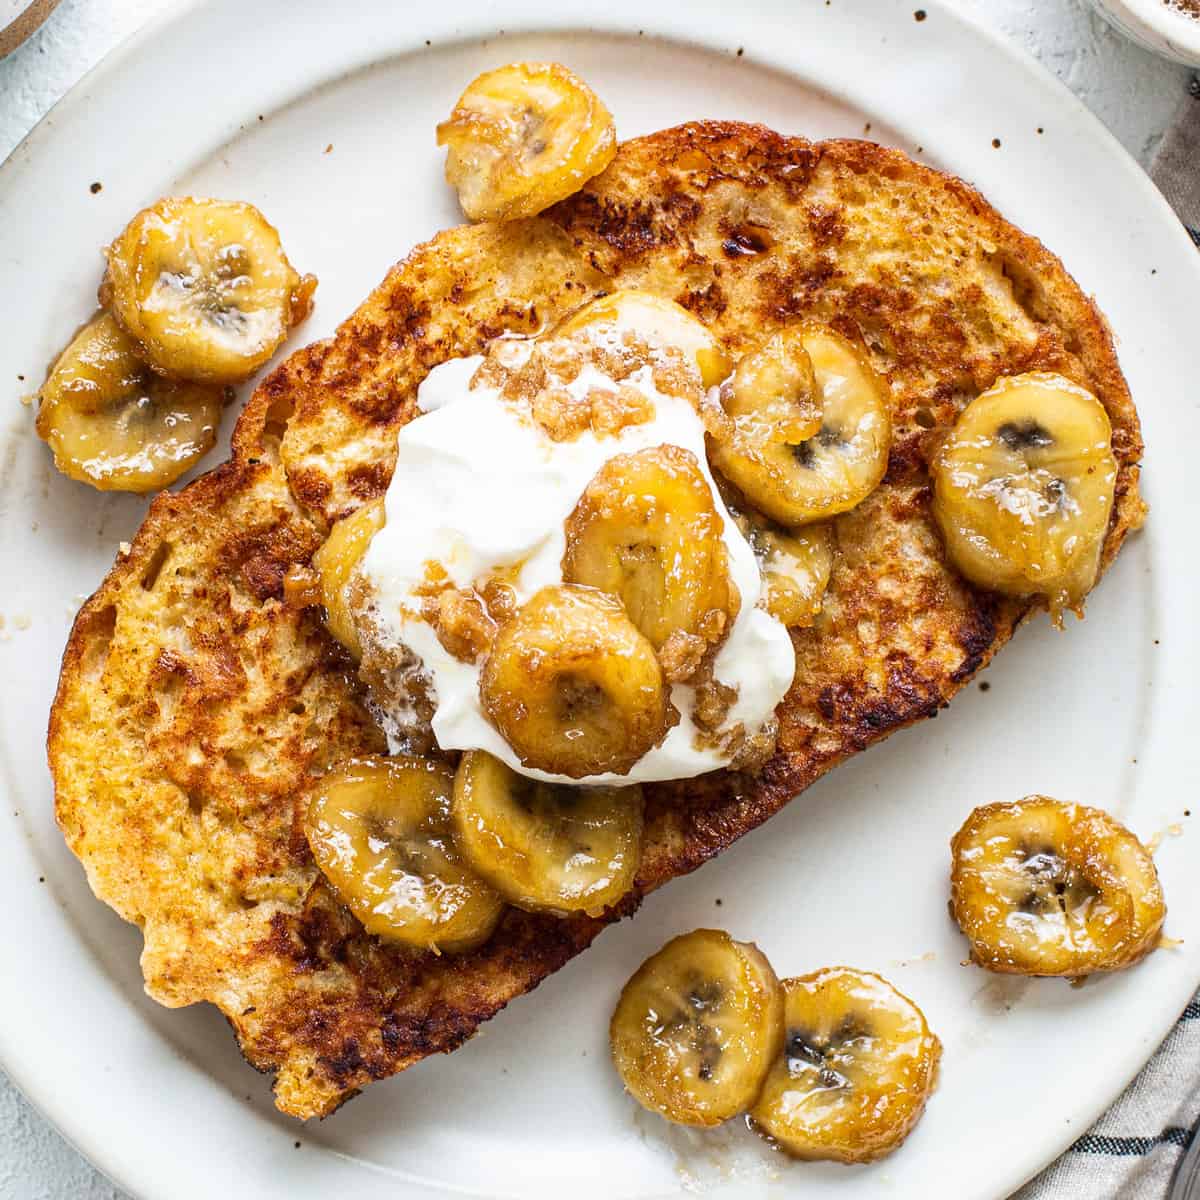 https://fitfoodiefinds.com/wp-content/uploads/2023/05/Bananas-Foster-French-Toast-sq.jpg